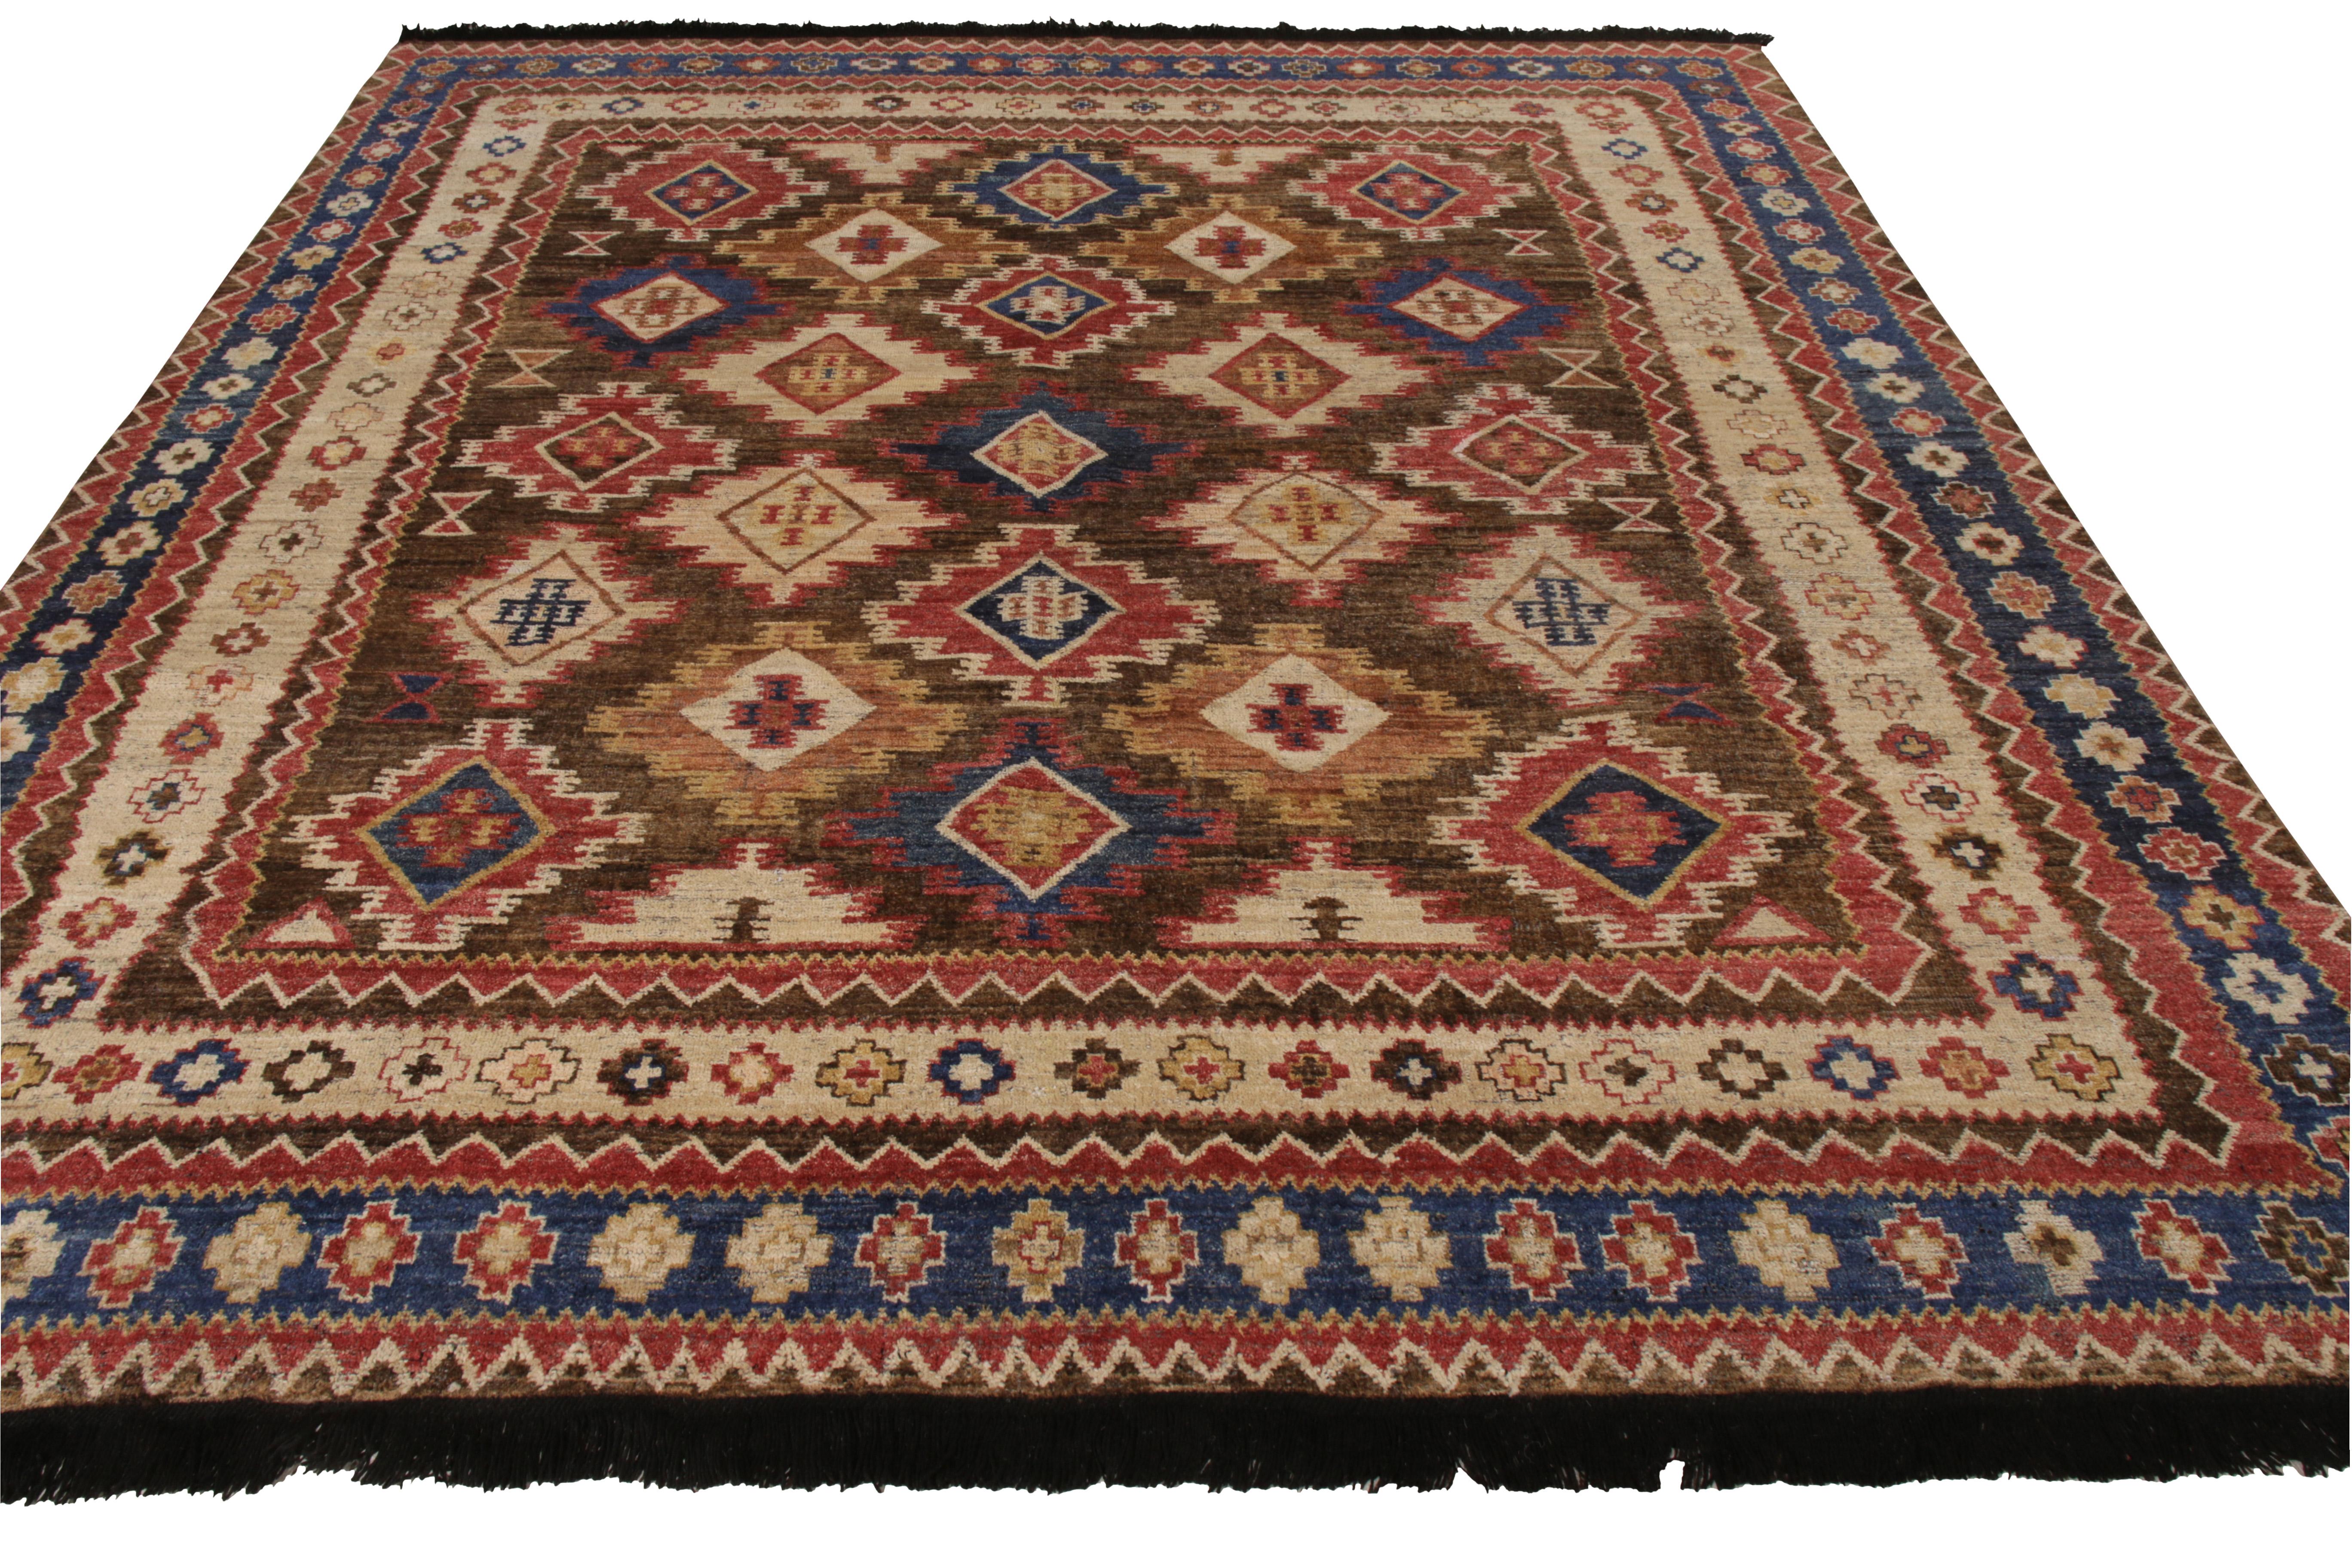 A 9 x 10 ode to Caucasian tribal rug styles, from Rug & Kilim’s Burano Collection. Hand knotted in soft Ghazni wool, enjoying rich beige-brown hues with blue and red throughout all over geometric patterns.

Custom capable: Please note all custom